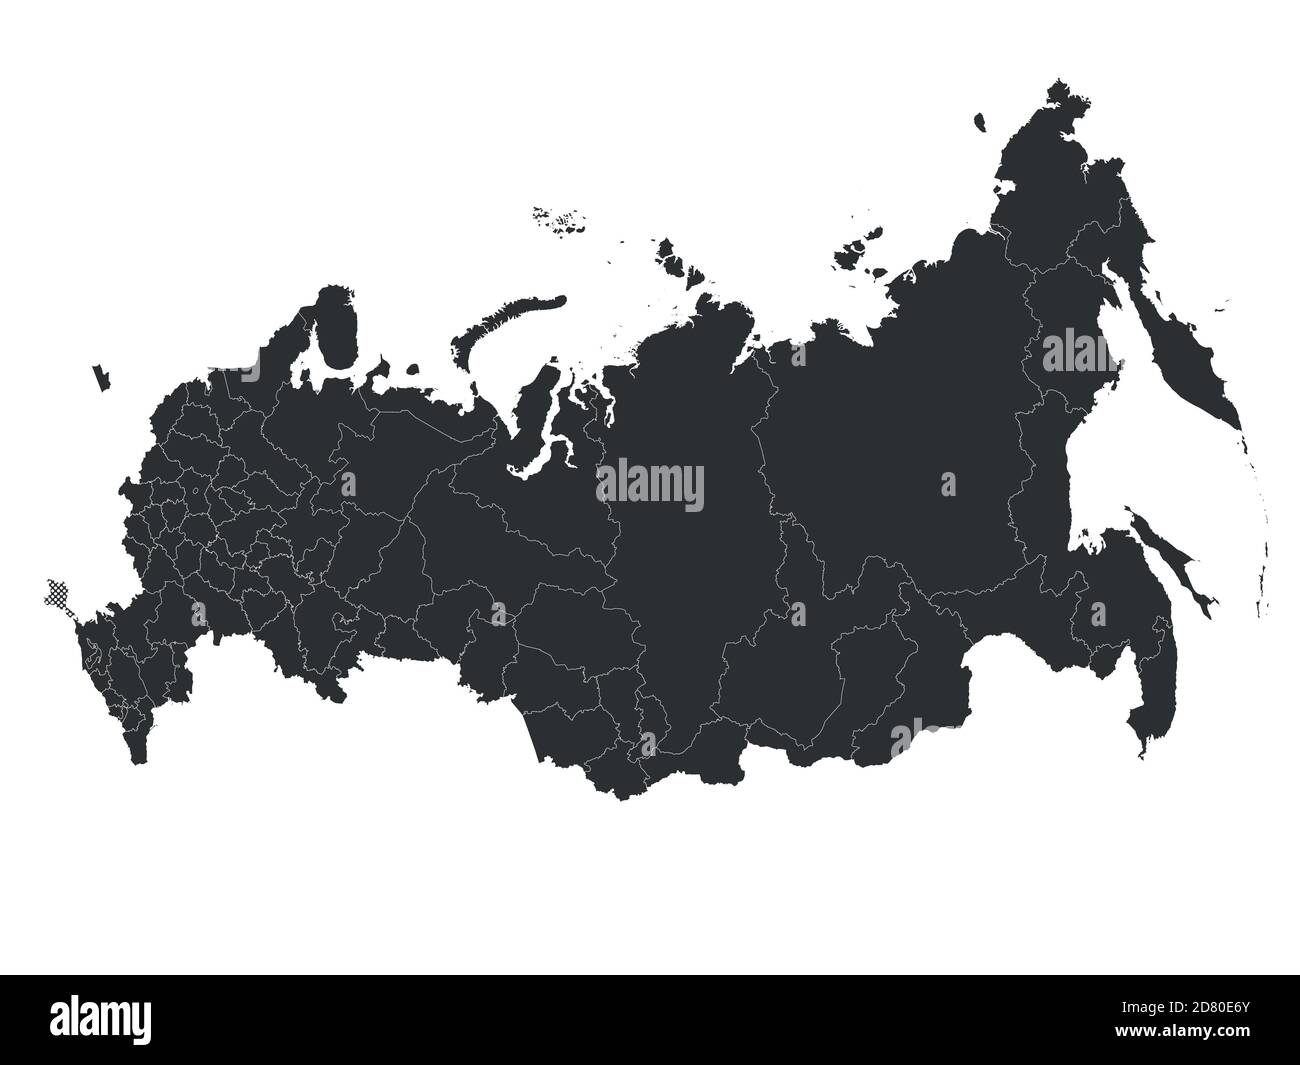 Blank political map of Russia, or Russian Federation. Federal subjects - republics, krays, oblasts, cities of federal significance, autonomous oblasts and autonomous okrugs. Simple black vector map. Stock Vector